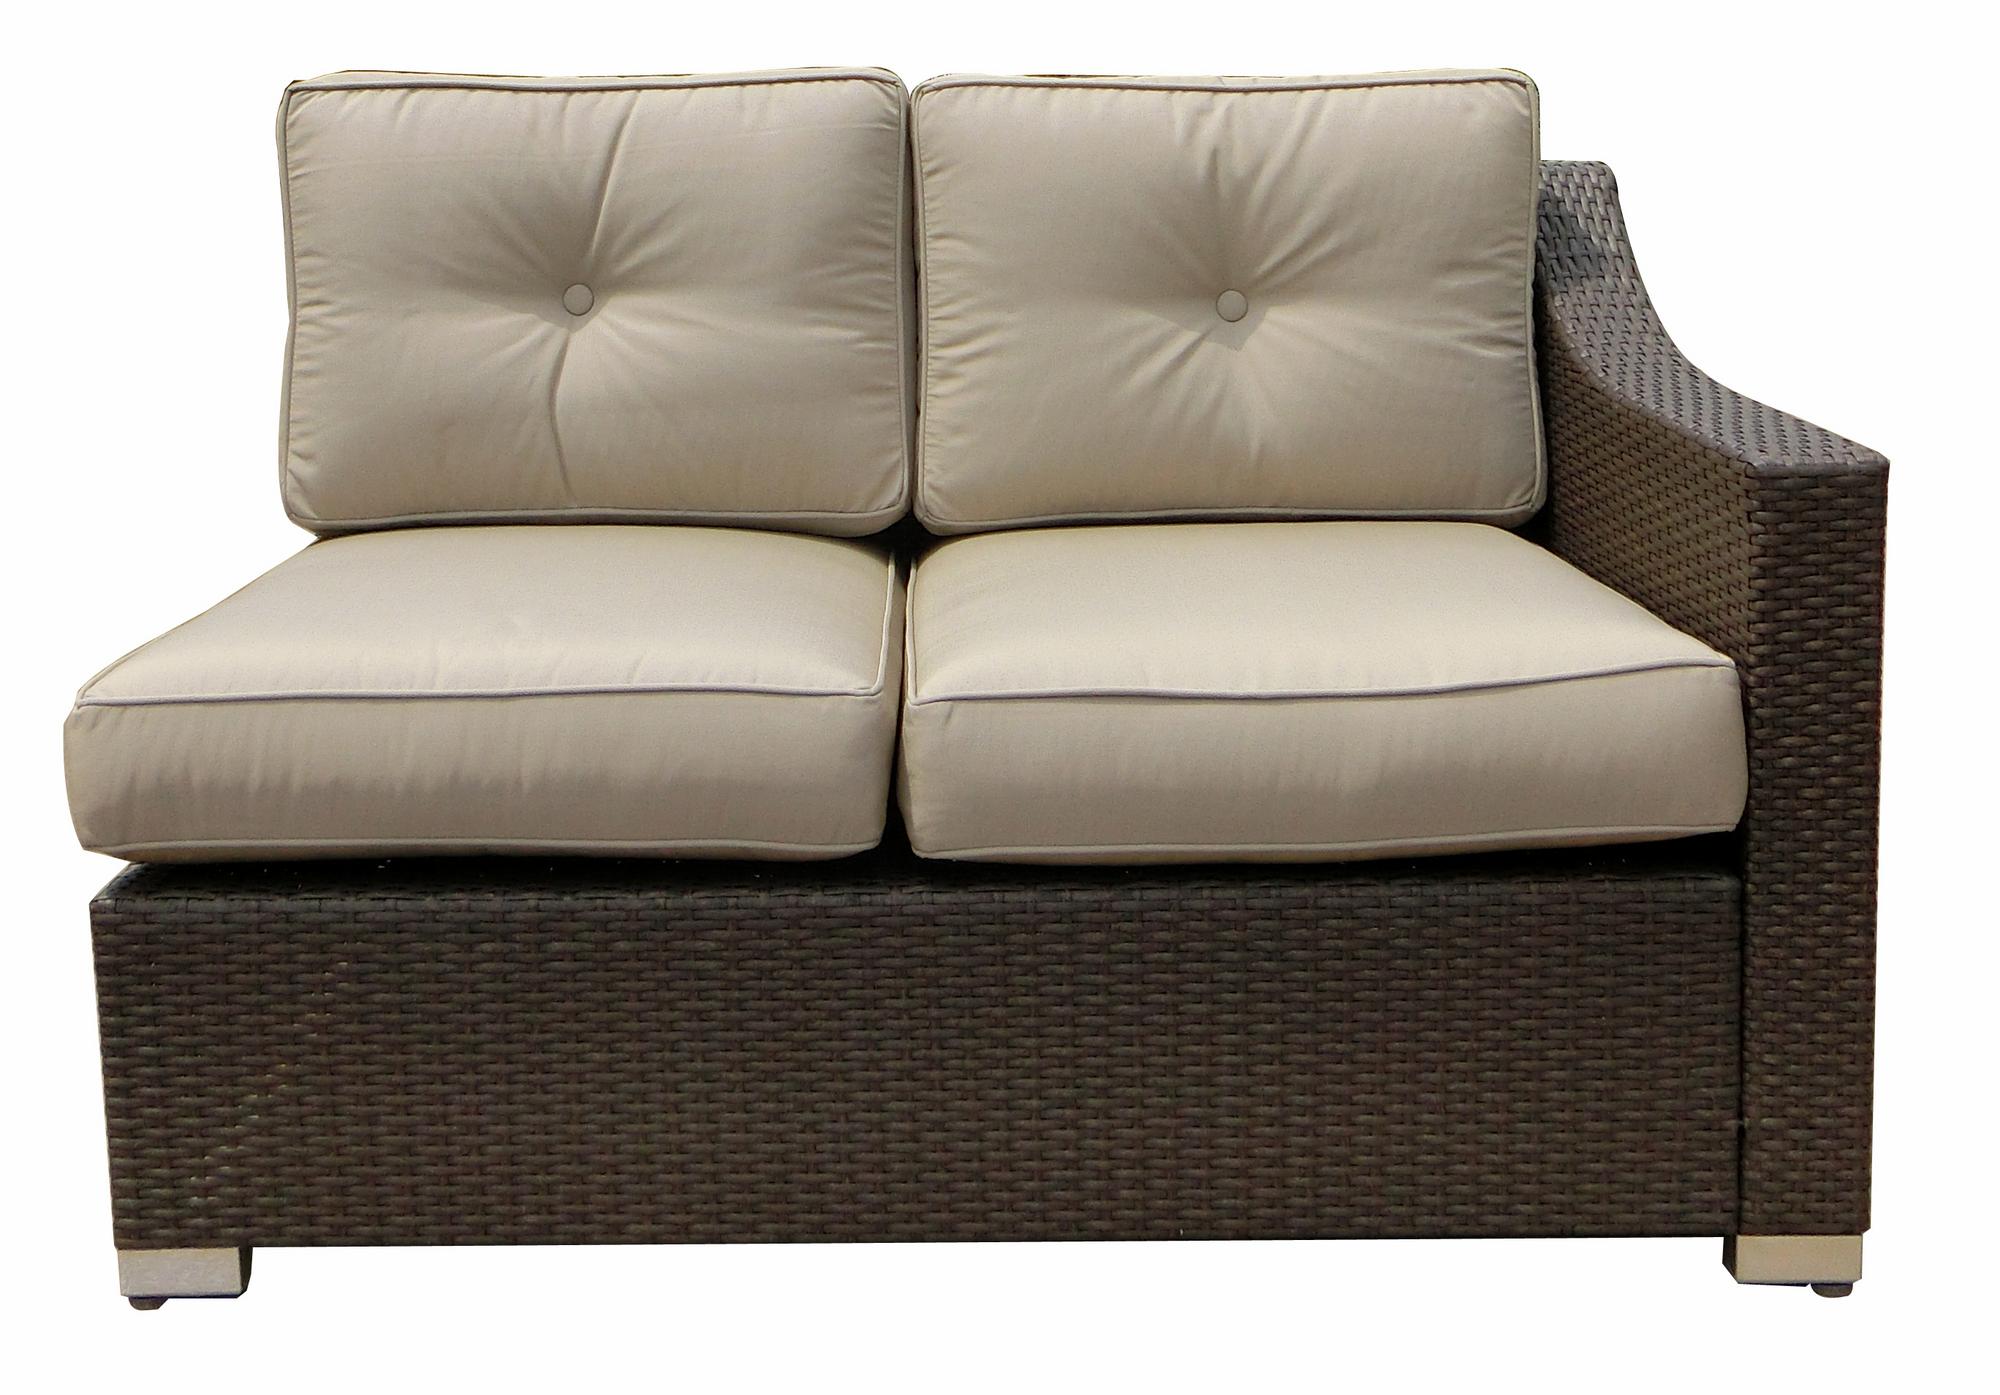 South Beach Wicker Patio Left Arm Sectional Loveseat